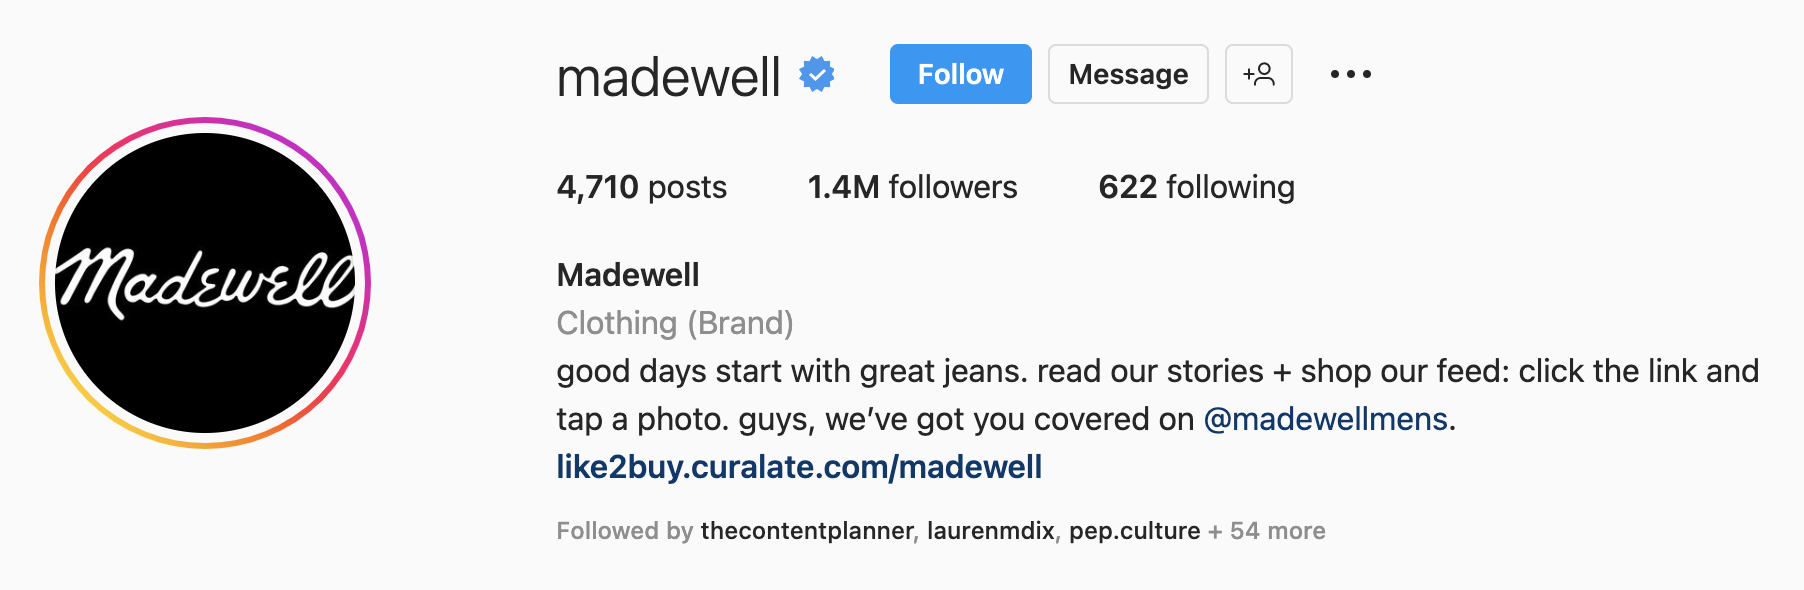 An Instagram bio example from Madewell